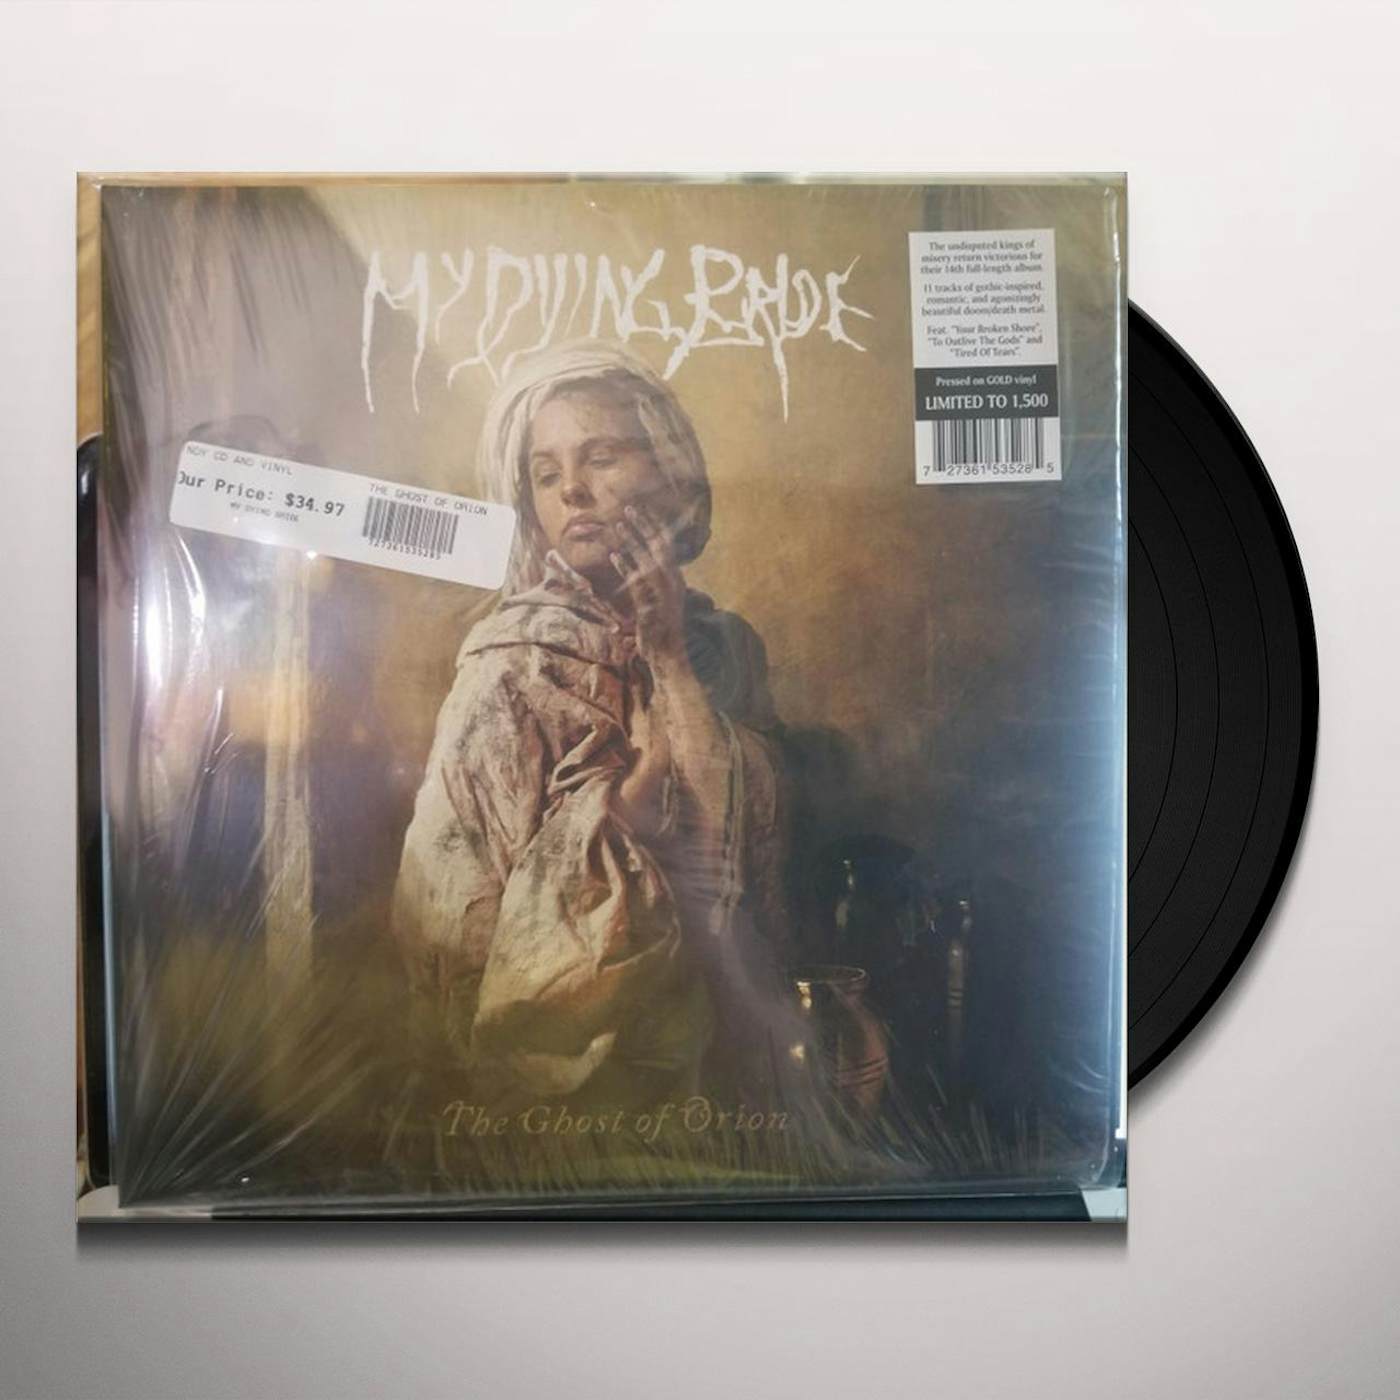 My Dying Bride GHOST OF ORION Vinyl Record